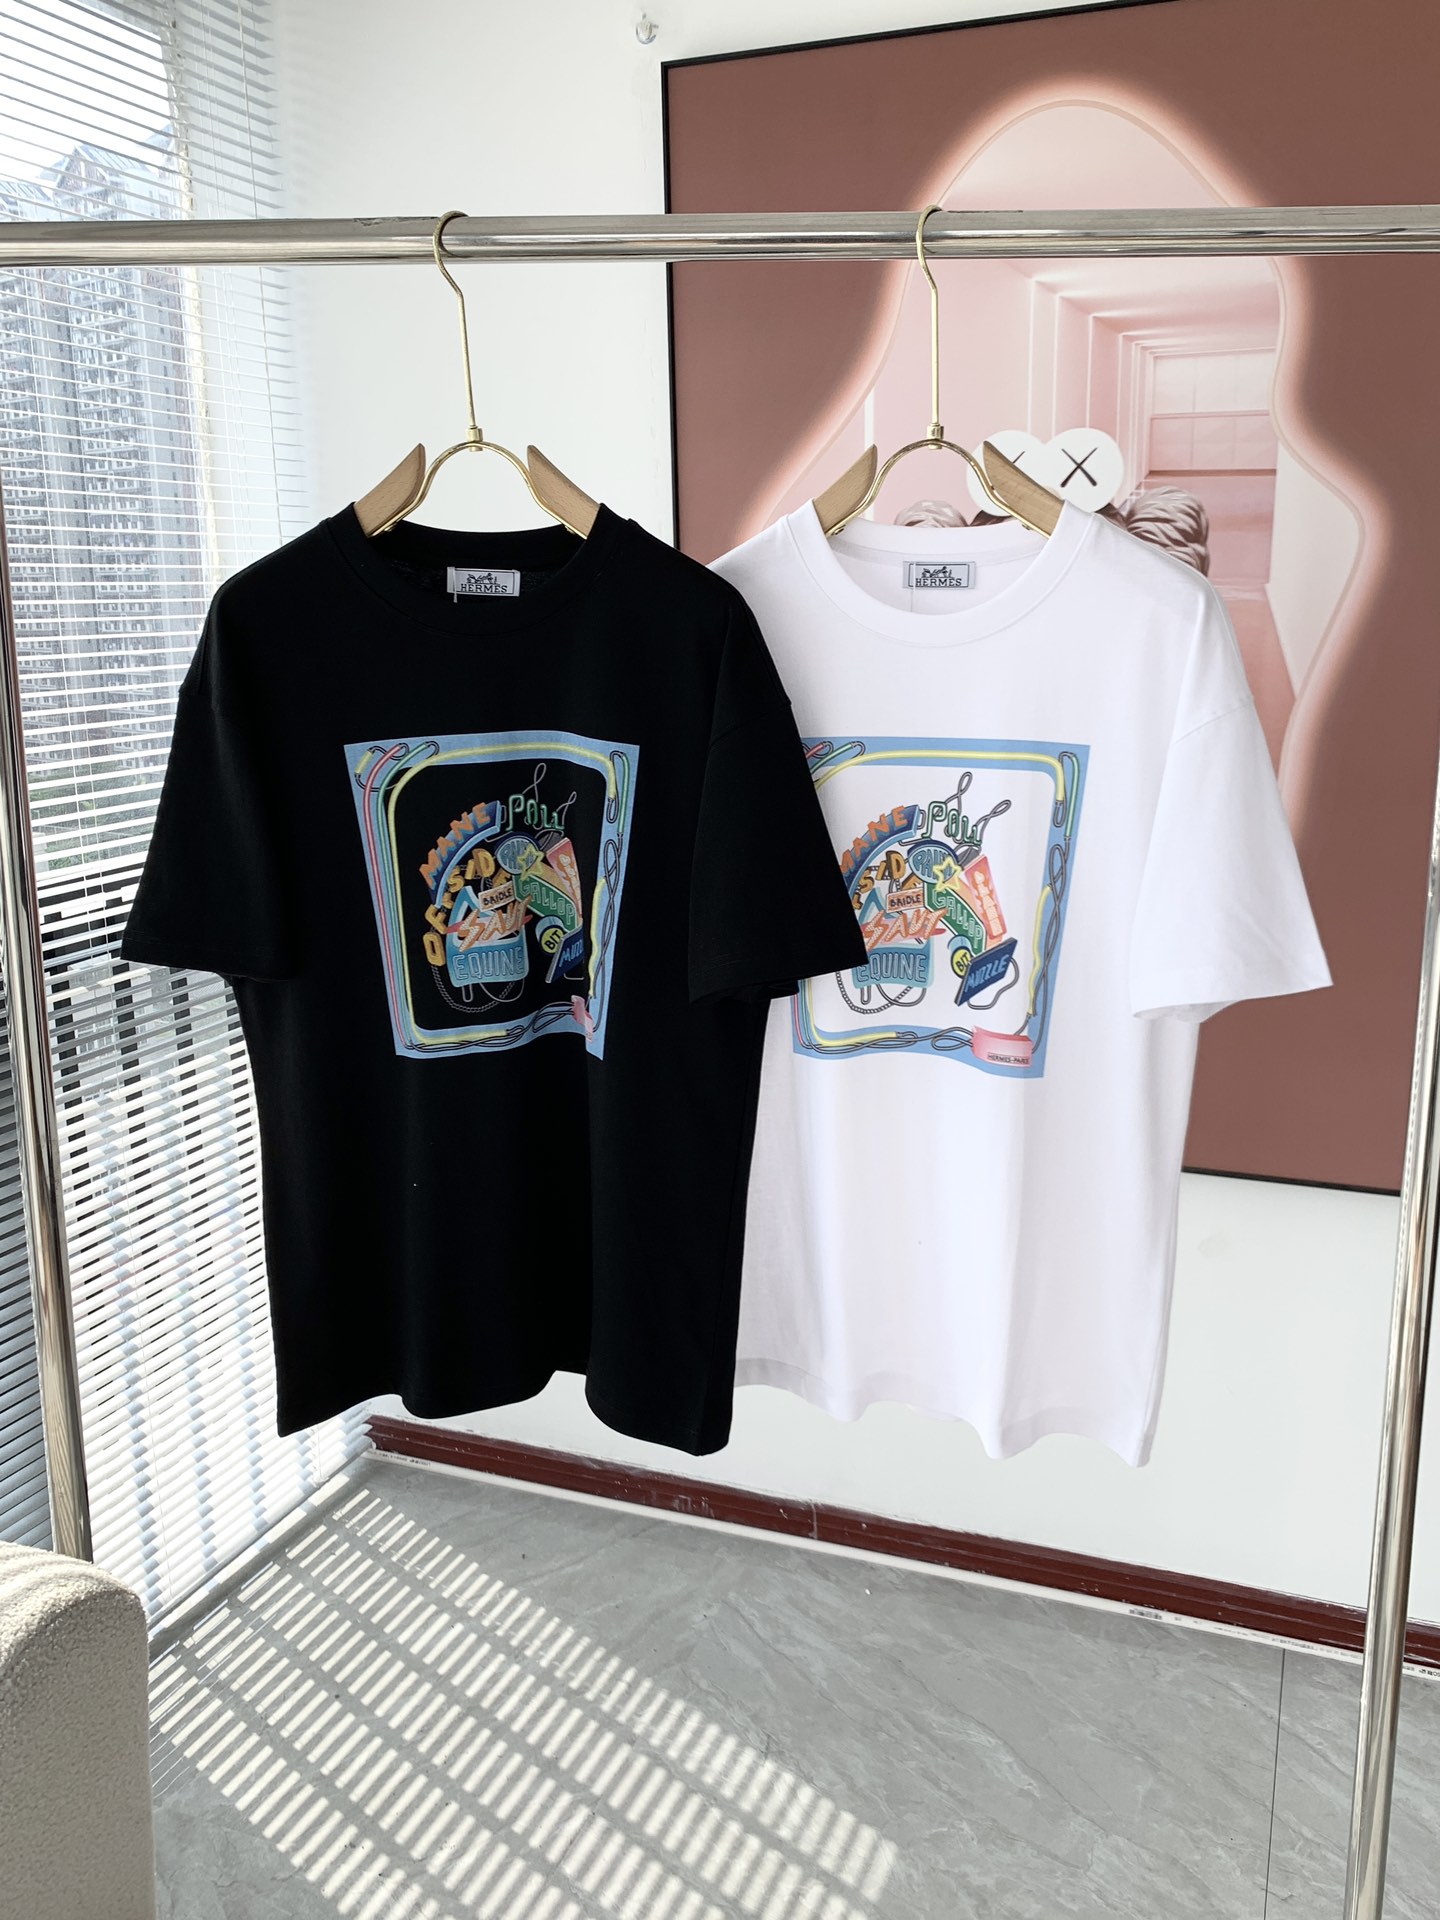 Hermes Clothing T-Shirt High Quality Customize
 Unisex Cotton Spring/Summer Collection Short Sleeve